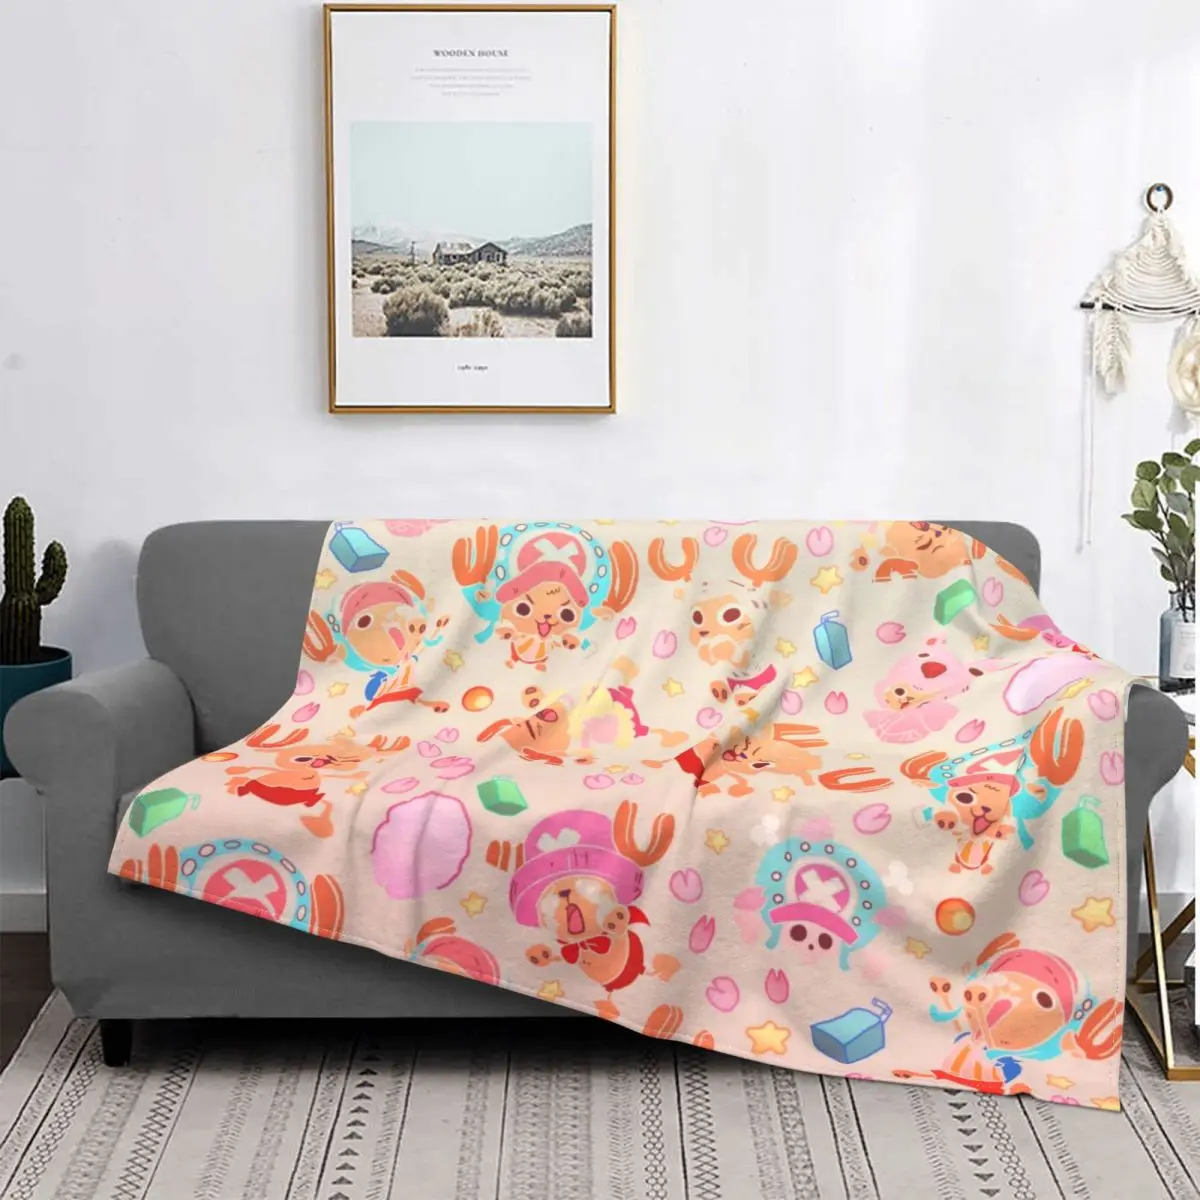 

Pirate Tony Tony Chopper Blanket Coral Fleece Plush Autumn/Winter Pirate Anime Warm Throw Blanket for Bedding Office Quilt